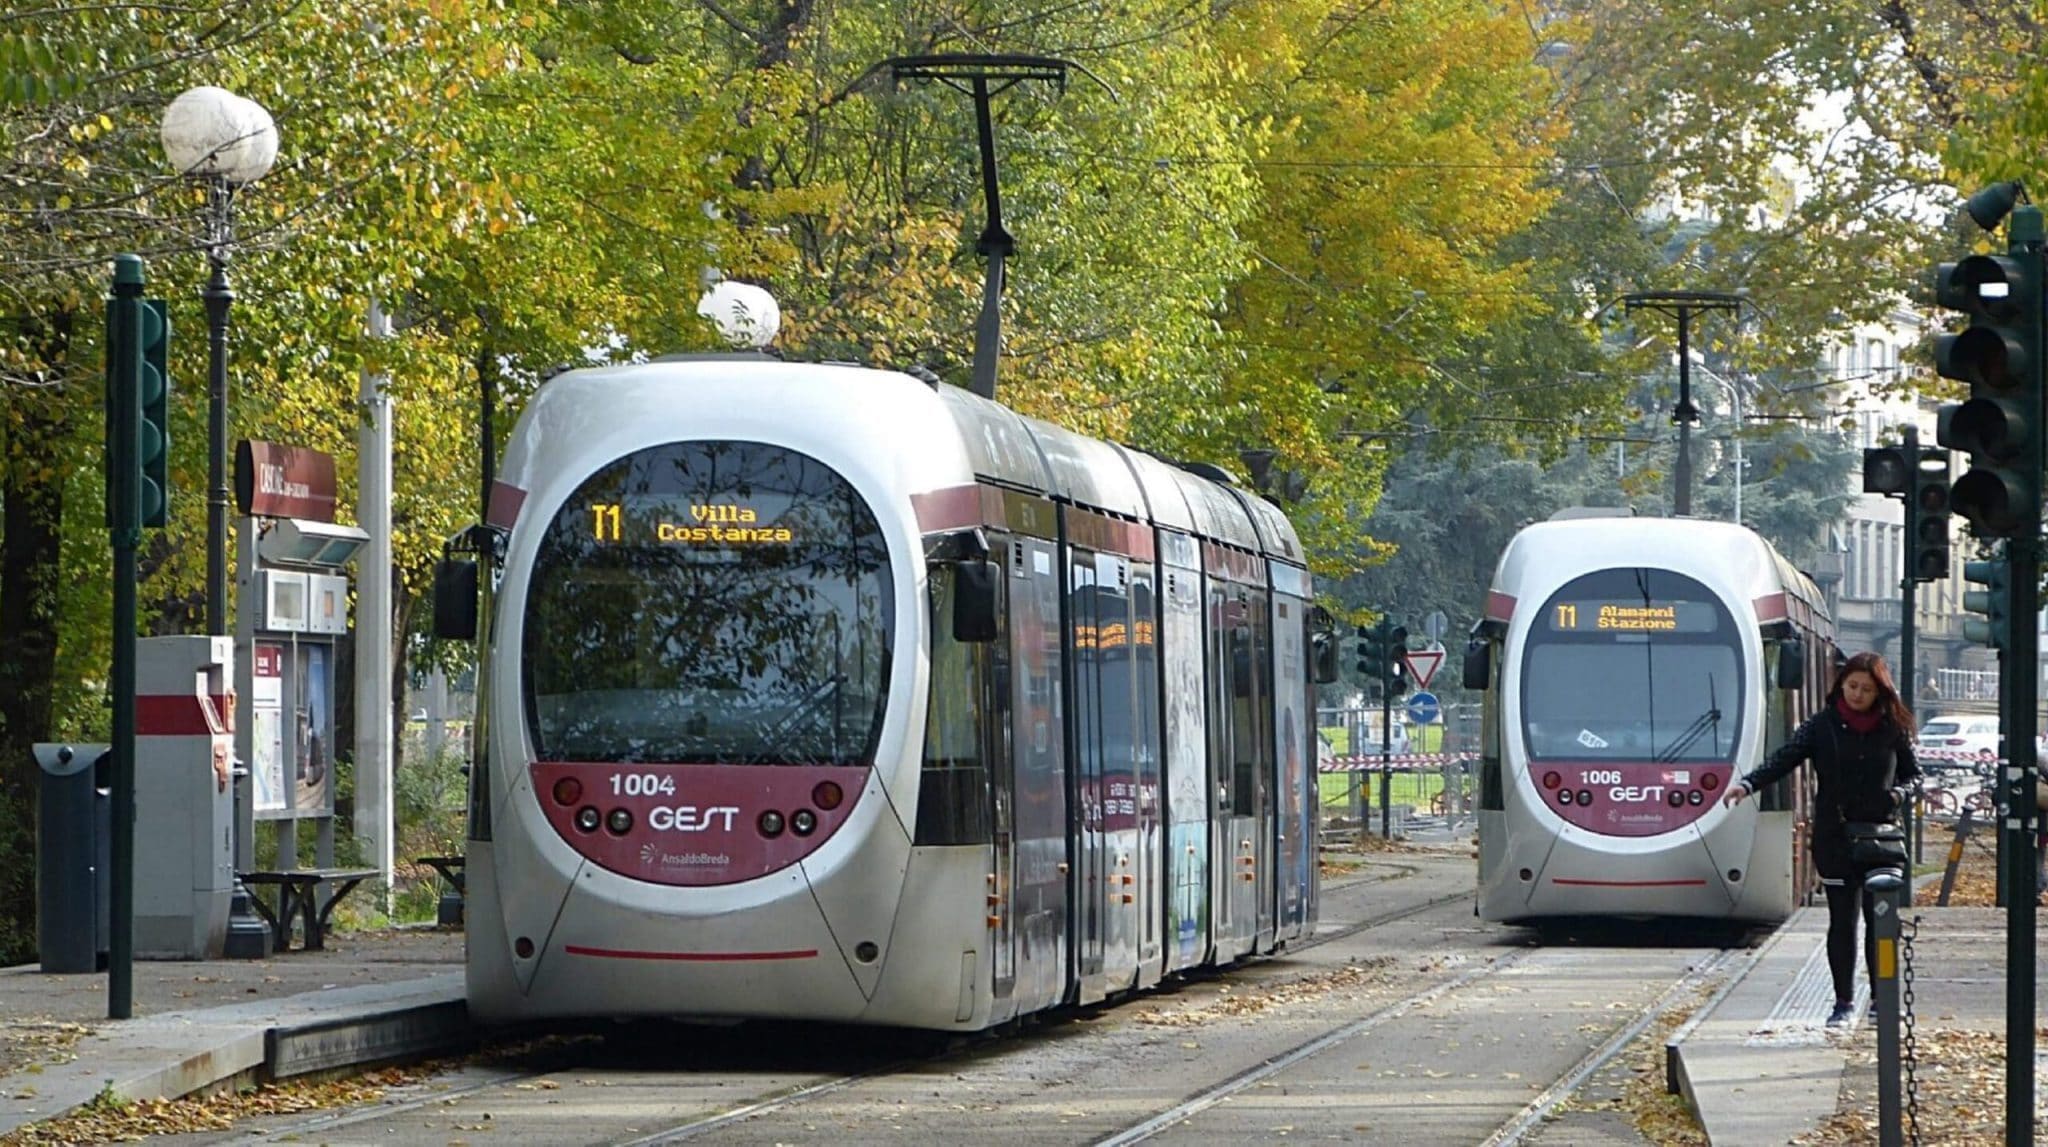 Two trams travelling down street with woman on the right hand side